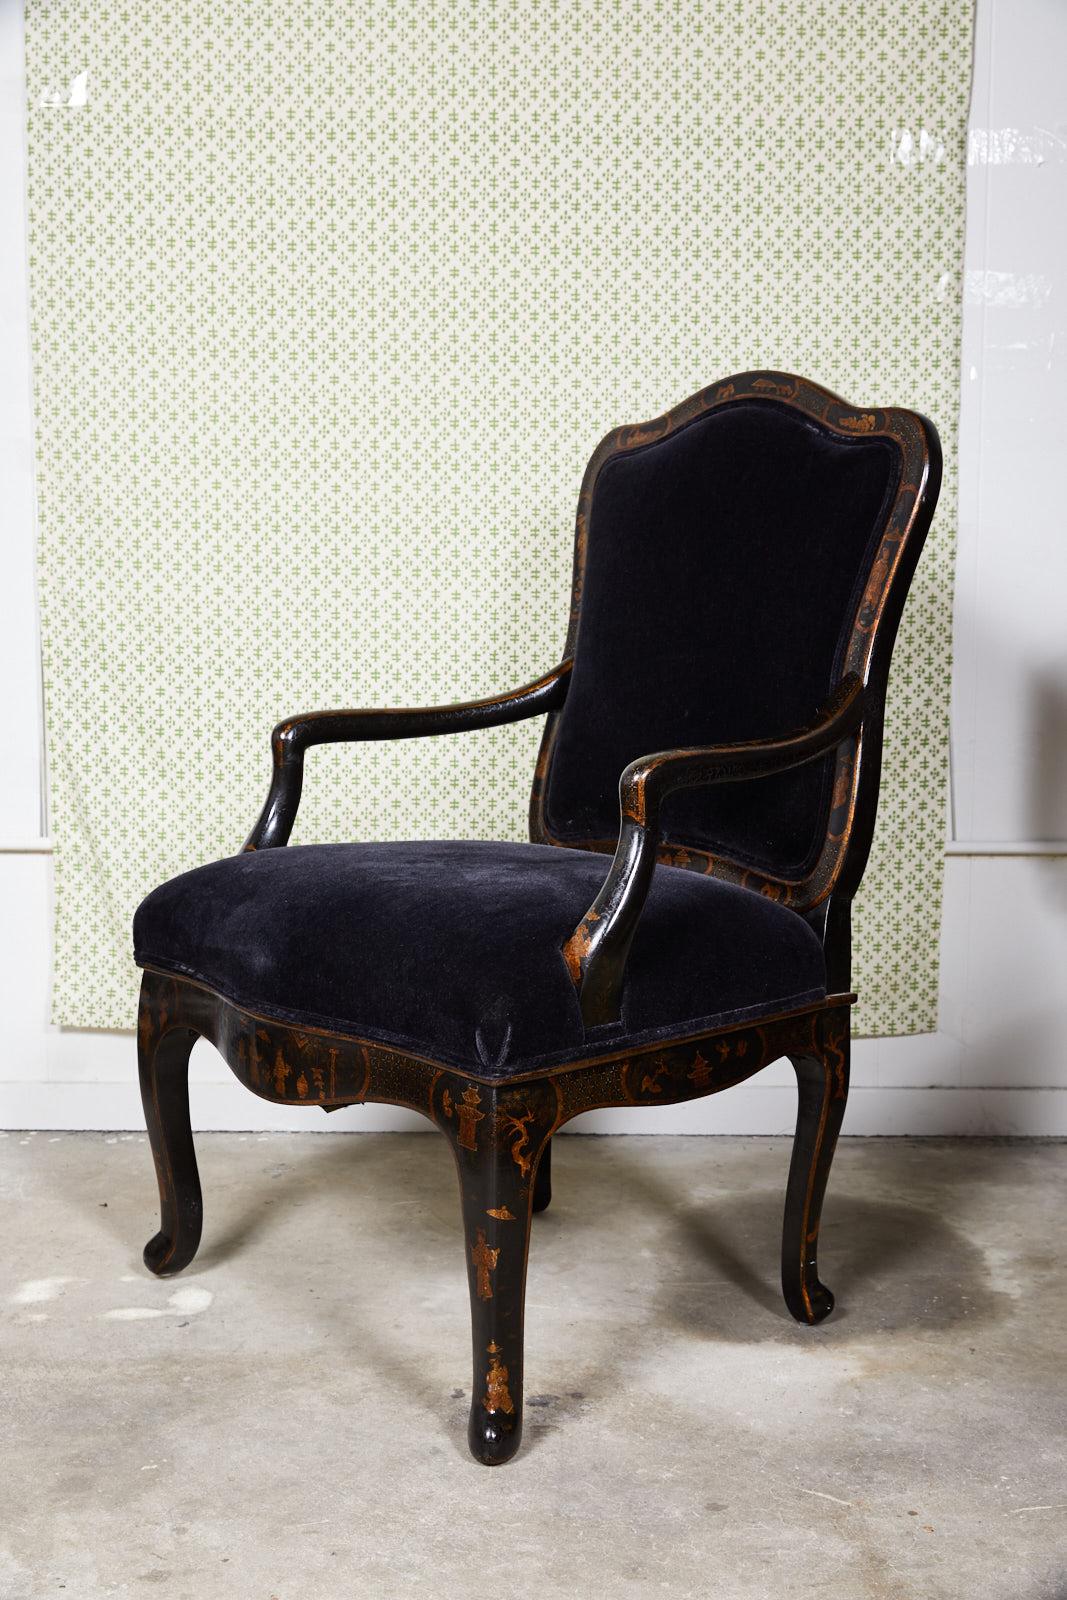 21st century American fauteuil designed in the style of Louis XV by Sally Sirkin Lewis for J Robert Scott. The chair's frame has been ebonized and painted with gilt chinoiserie details on all sides and beautifully upholstered in a jet black velvet.